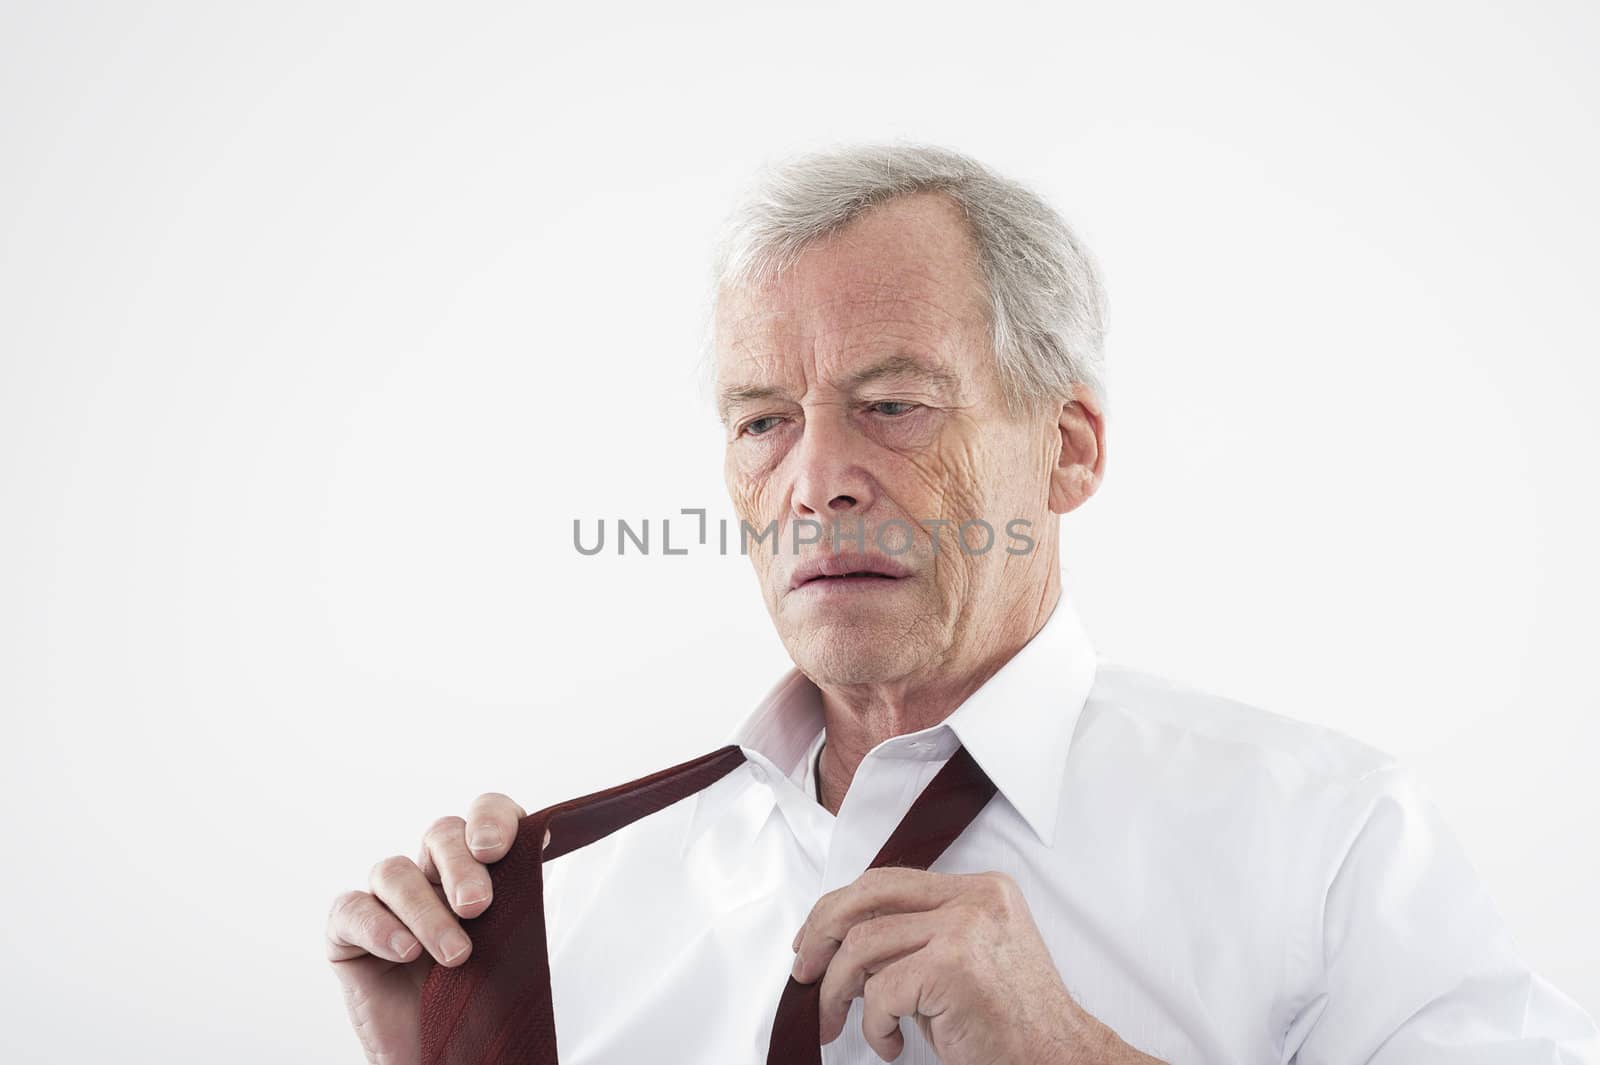 Serious elderly man with a pensive expression putting on his tie holding the two ends in his hands as he stands thinking, head and shoulders studio portrait